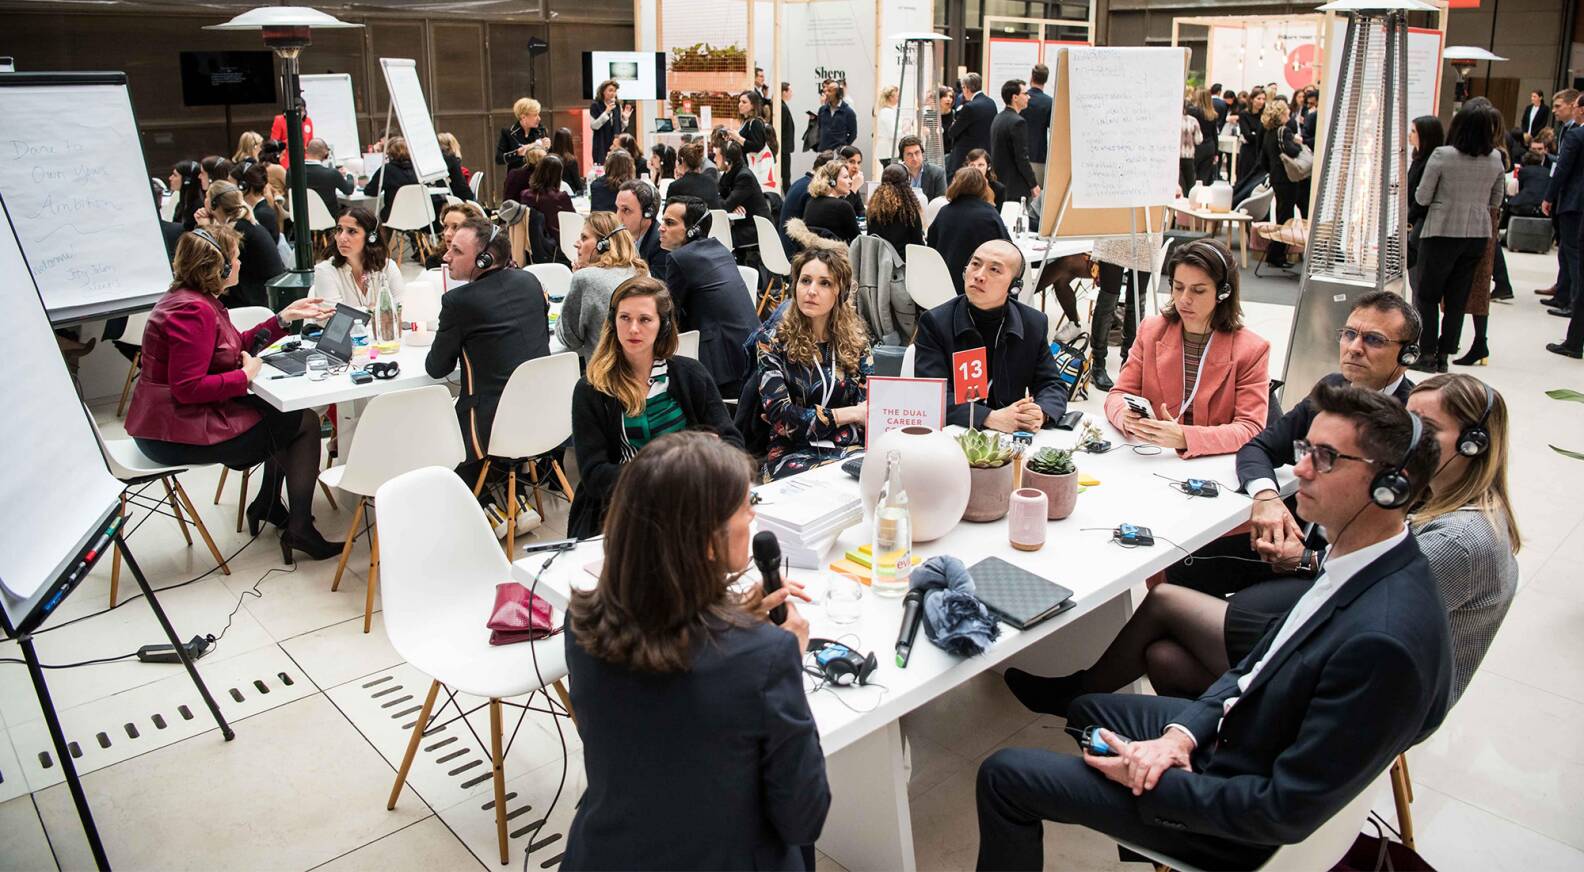 LVMH Launches an Accelerator Initiative to Discover, Foster